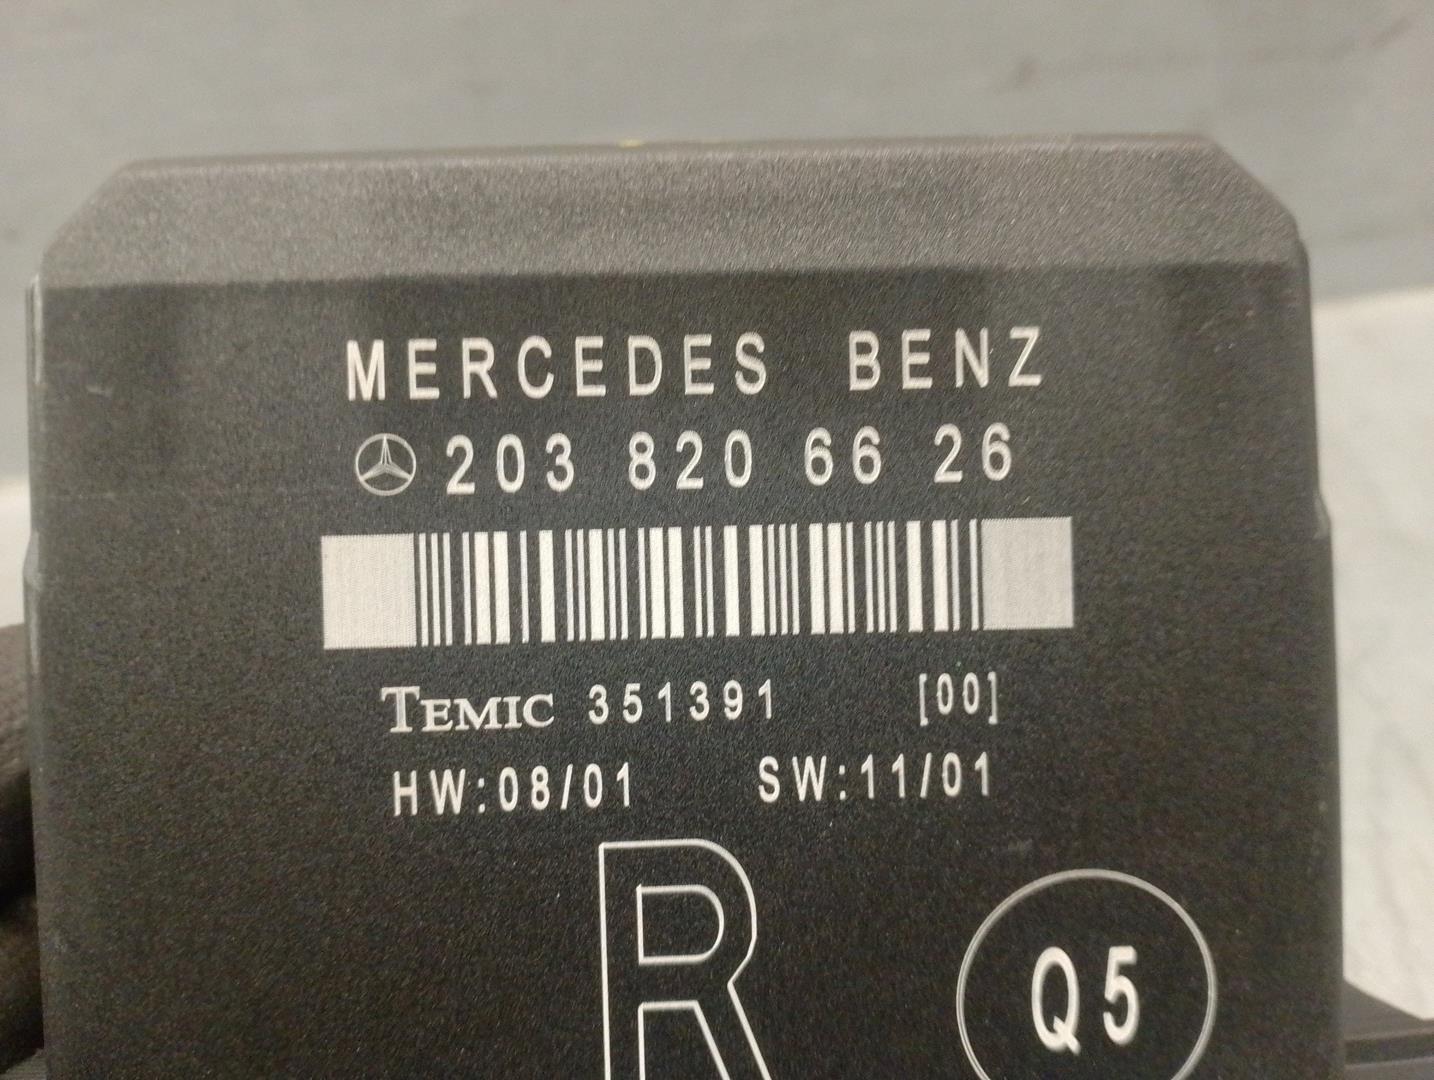 MERCEDES-BENZ C-Class W203/S203/CL203 (2000-2008) Other Control Units 2038206626, 351391, TEMIC 24193988